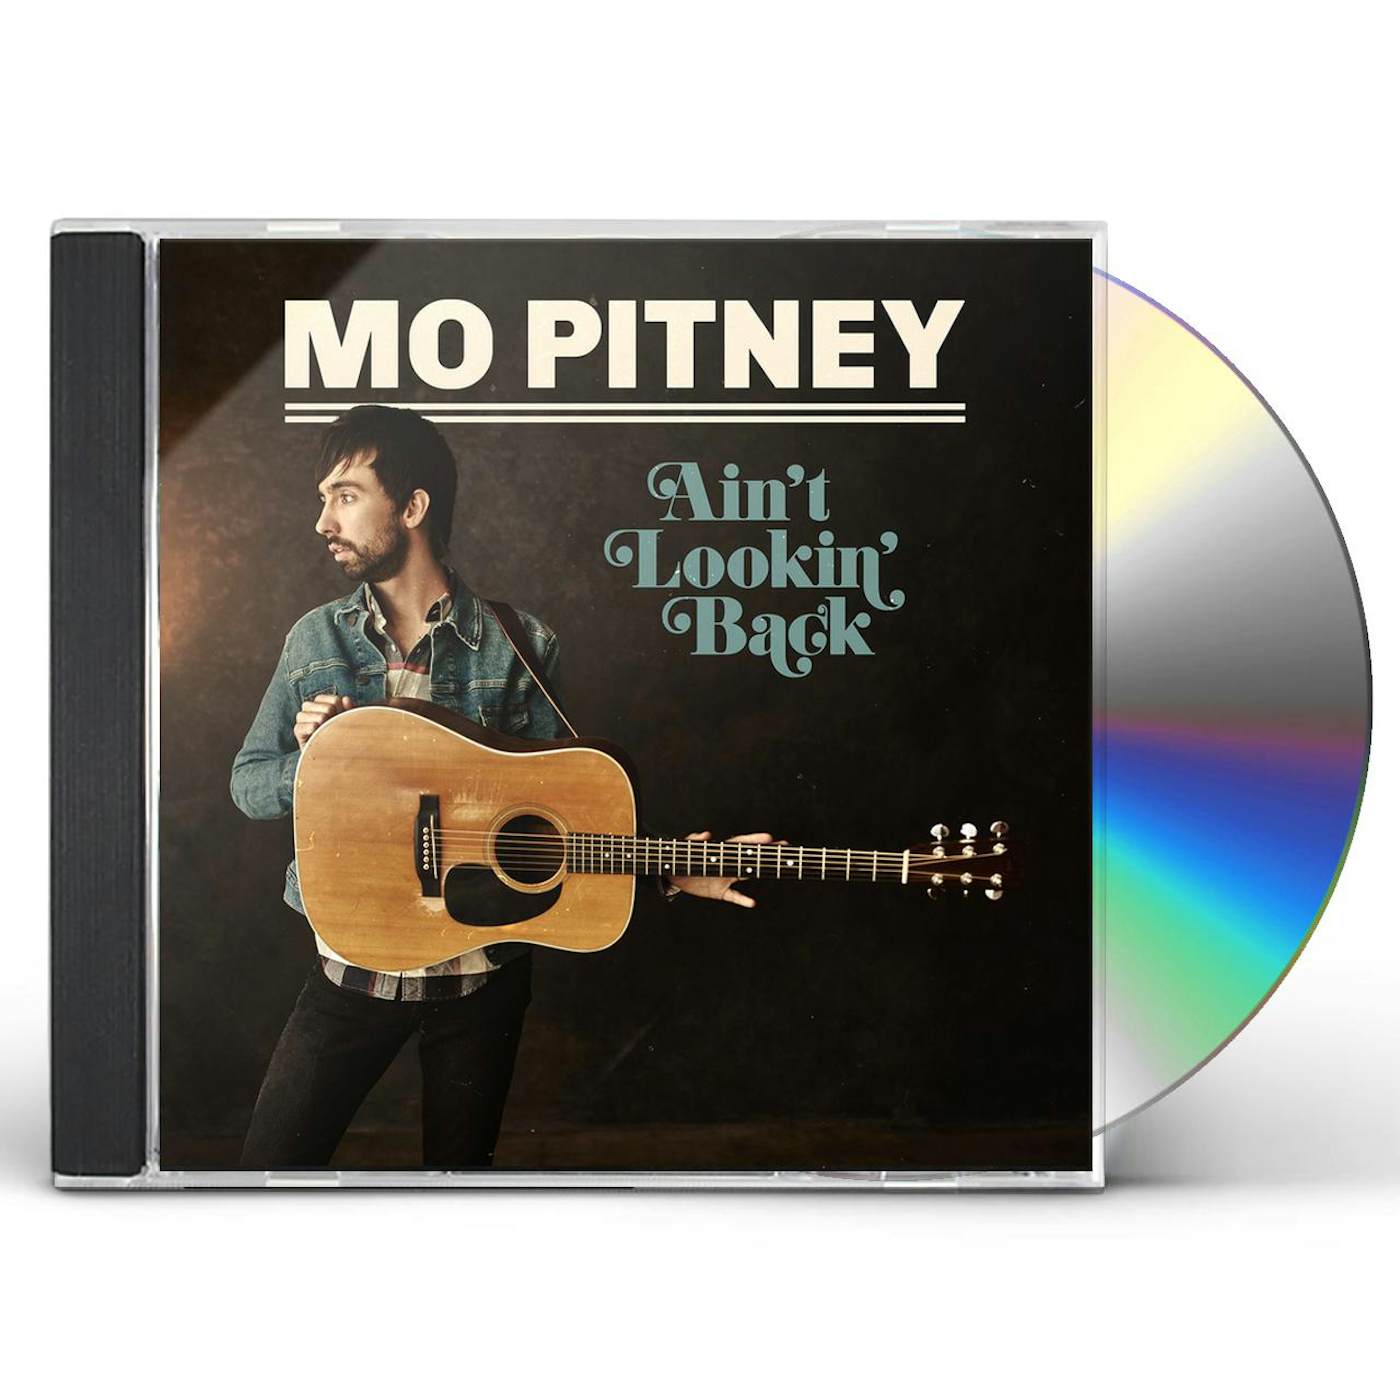 Mo Pitney AIN'T LOOKING BACK CD